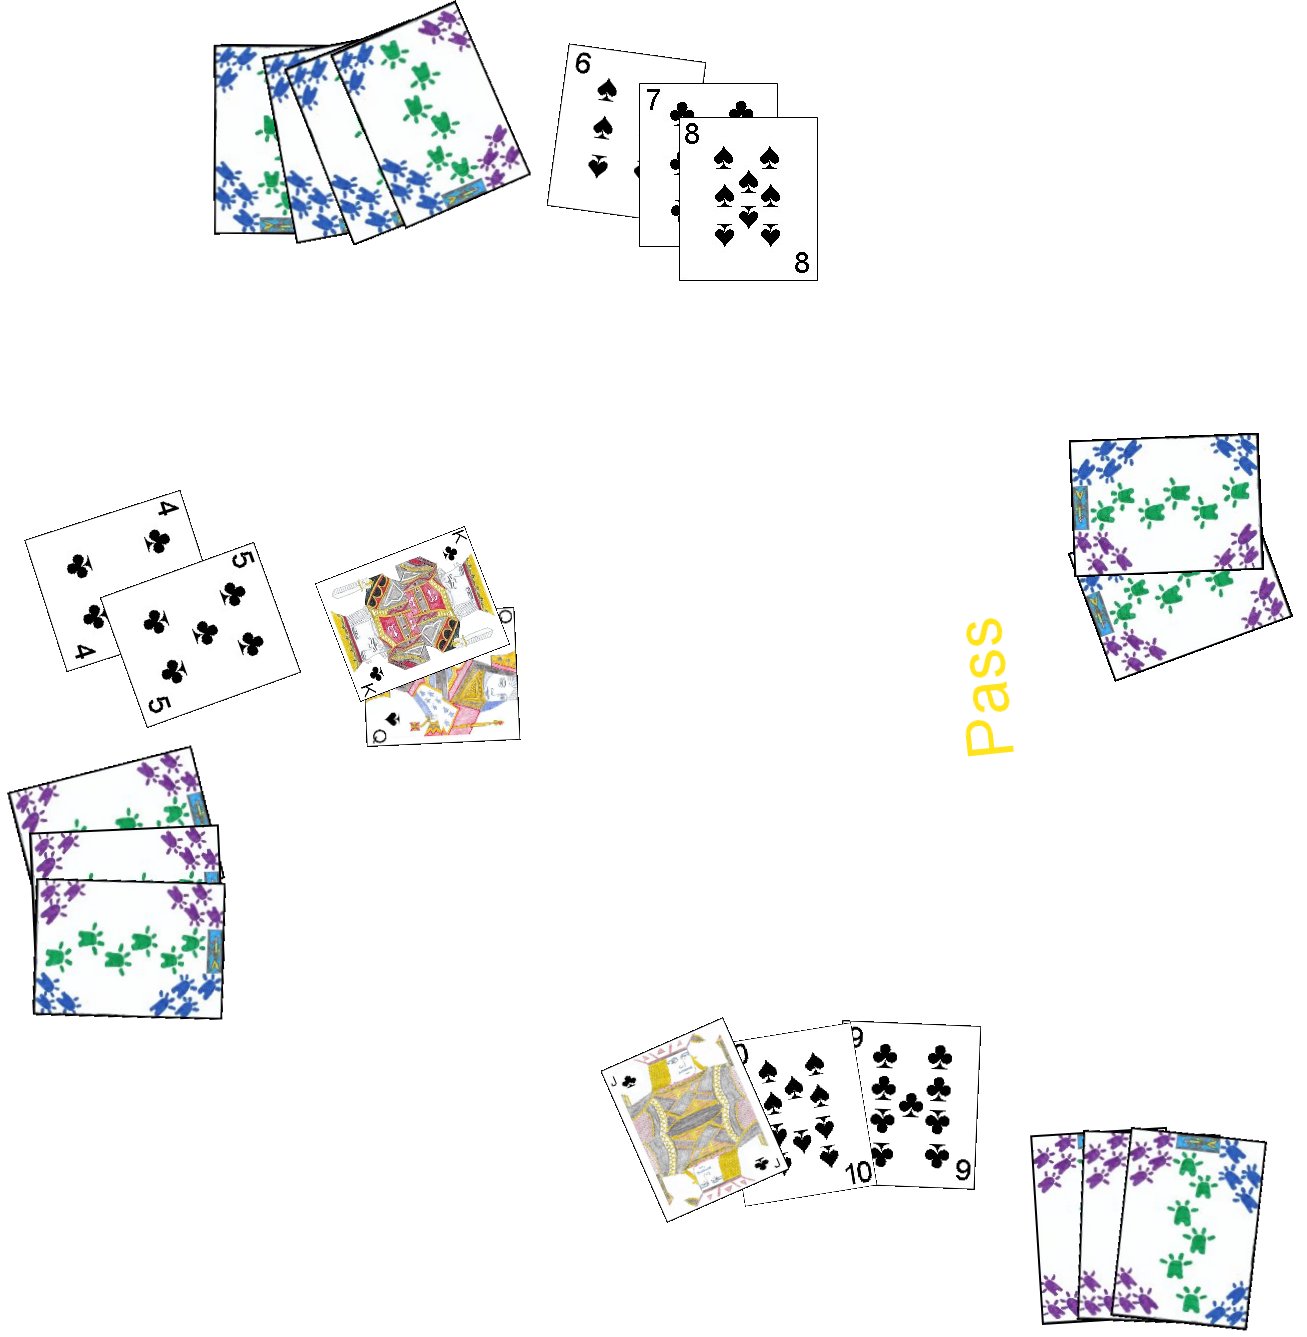 A Sequence being played in the card game Comet